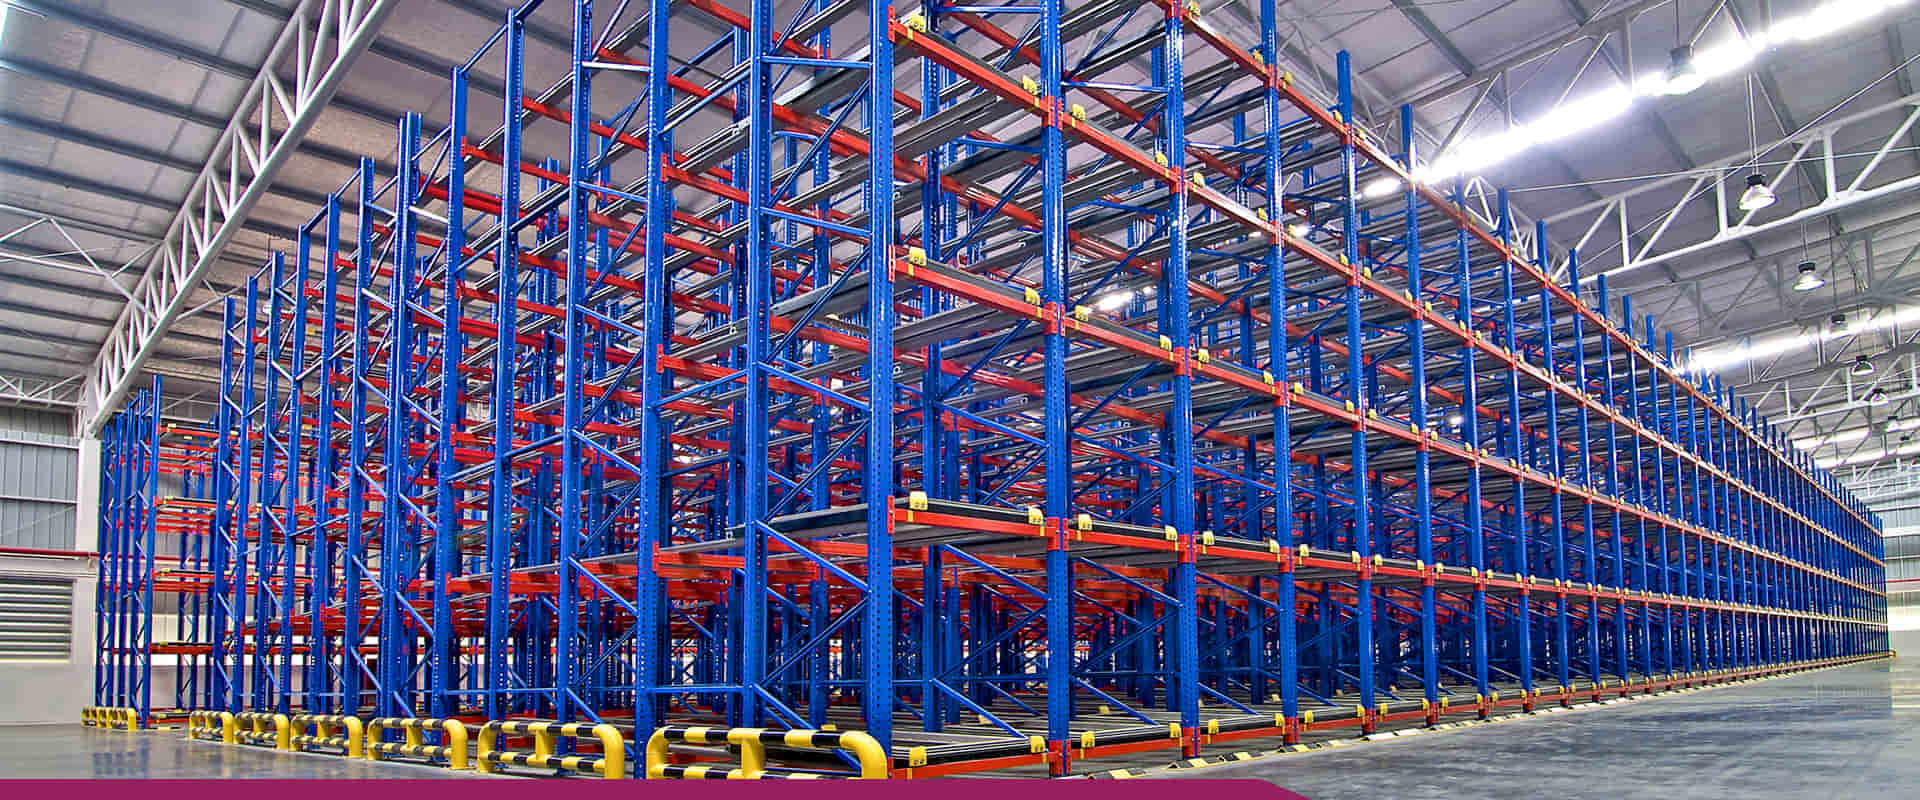 India’s Top Warehouse And Industrial Storage Racks Manufacturer In Udaipur